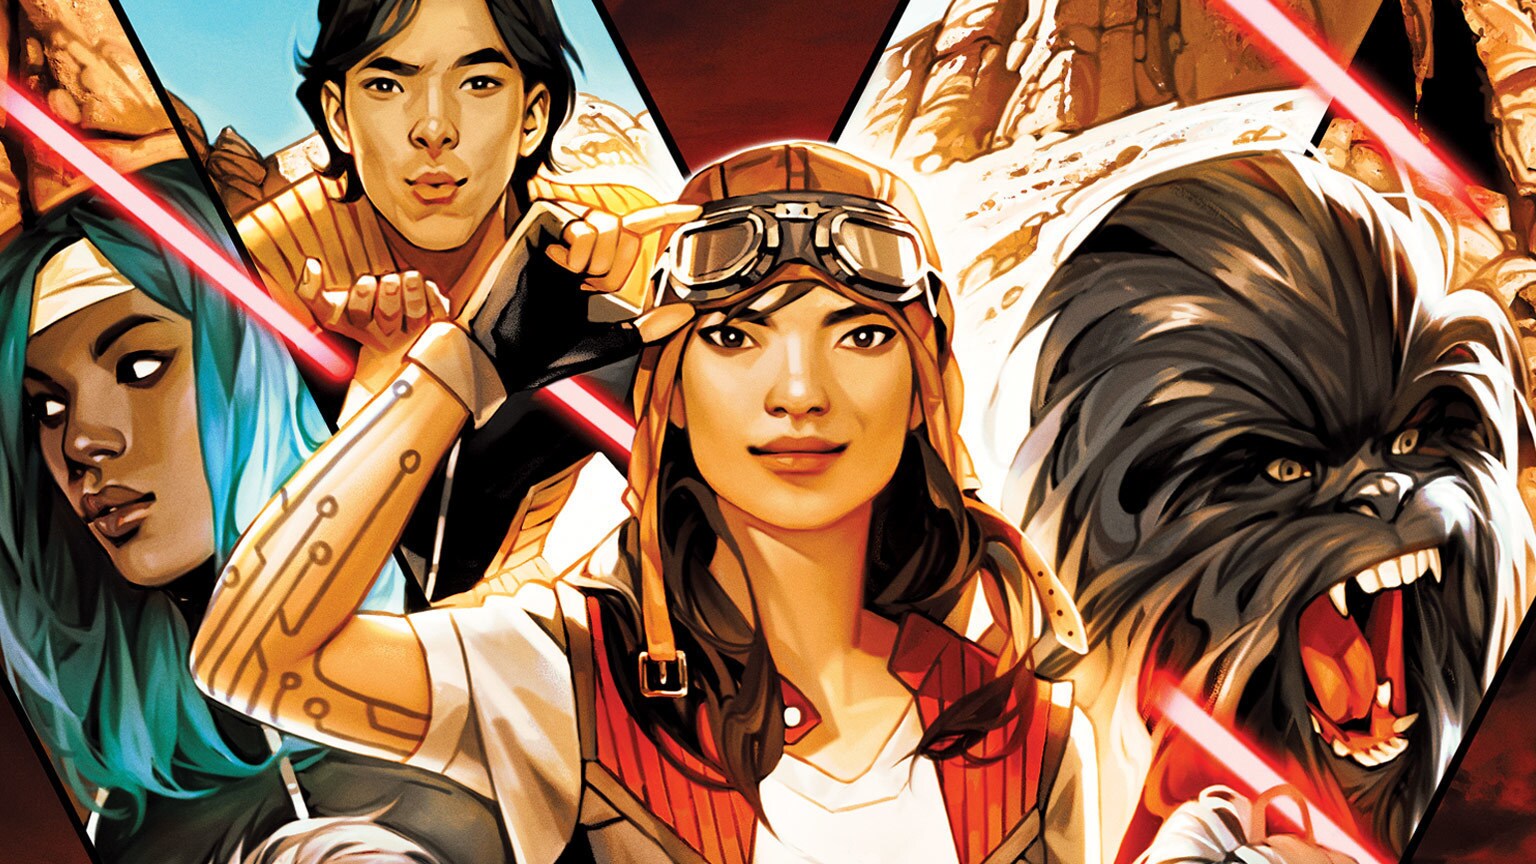 "You Never Know What's Going to Happen": Alyssa Wong on Her Upcoming Doctor Aphra Series - Exclusive